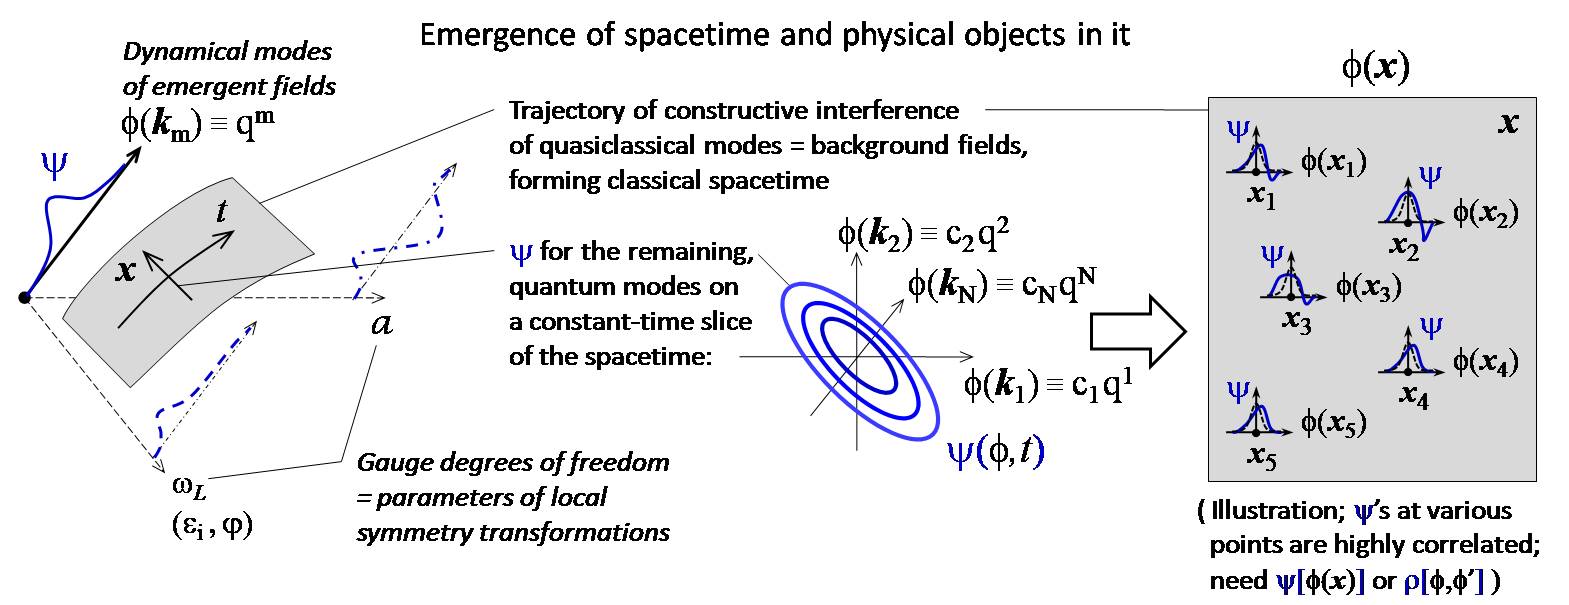 Emergence of spacetime and physical objects in it